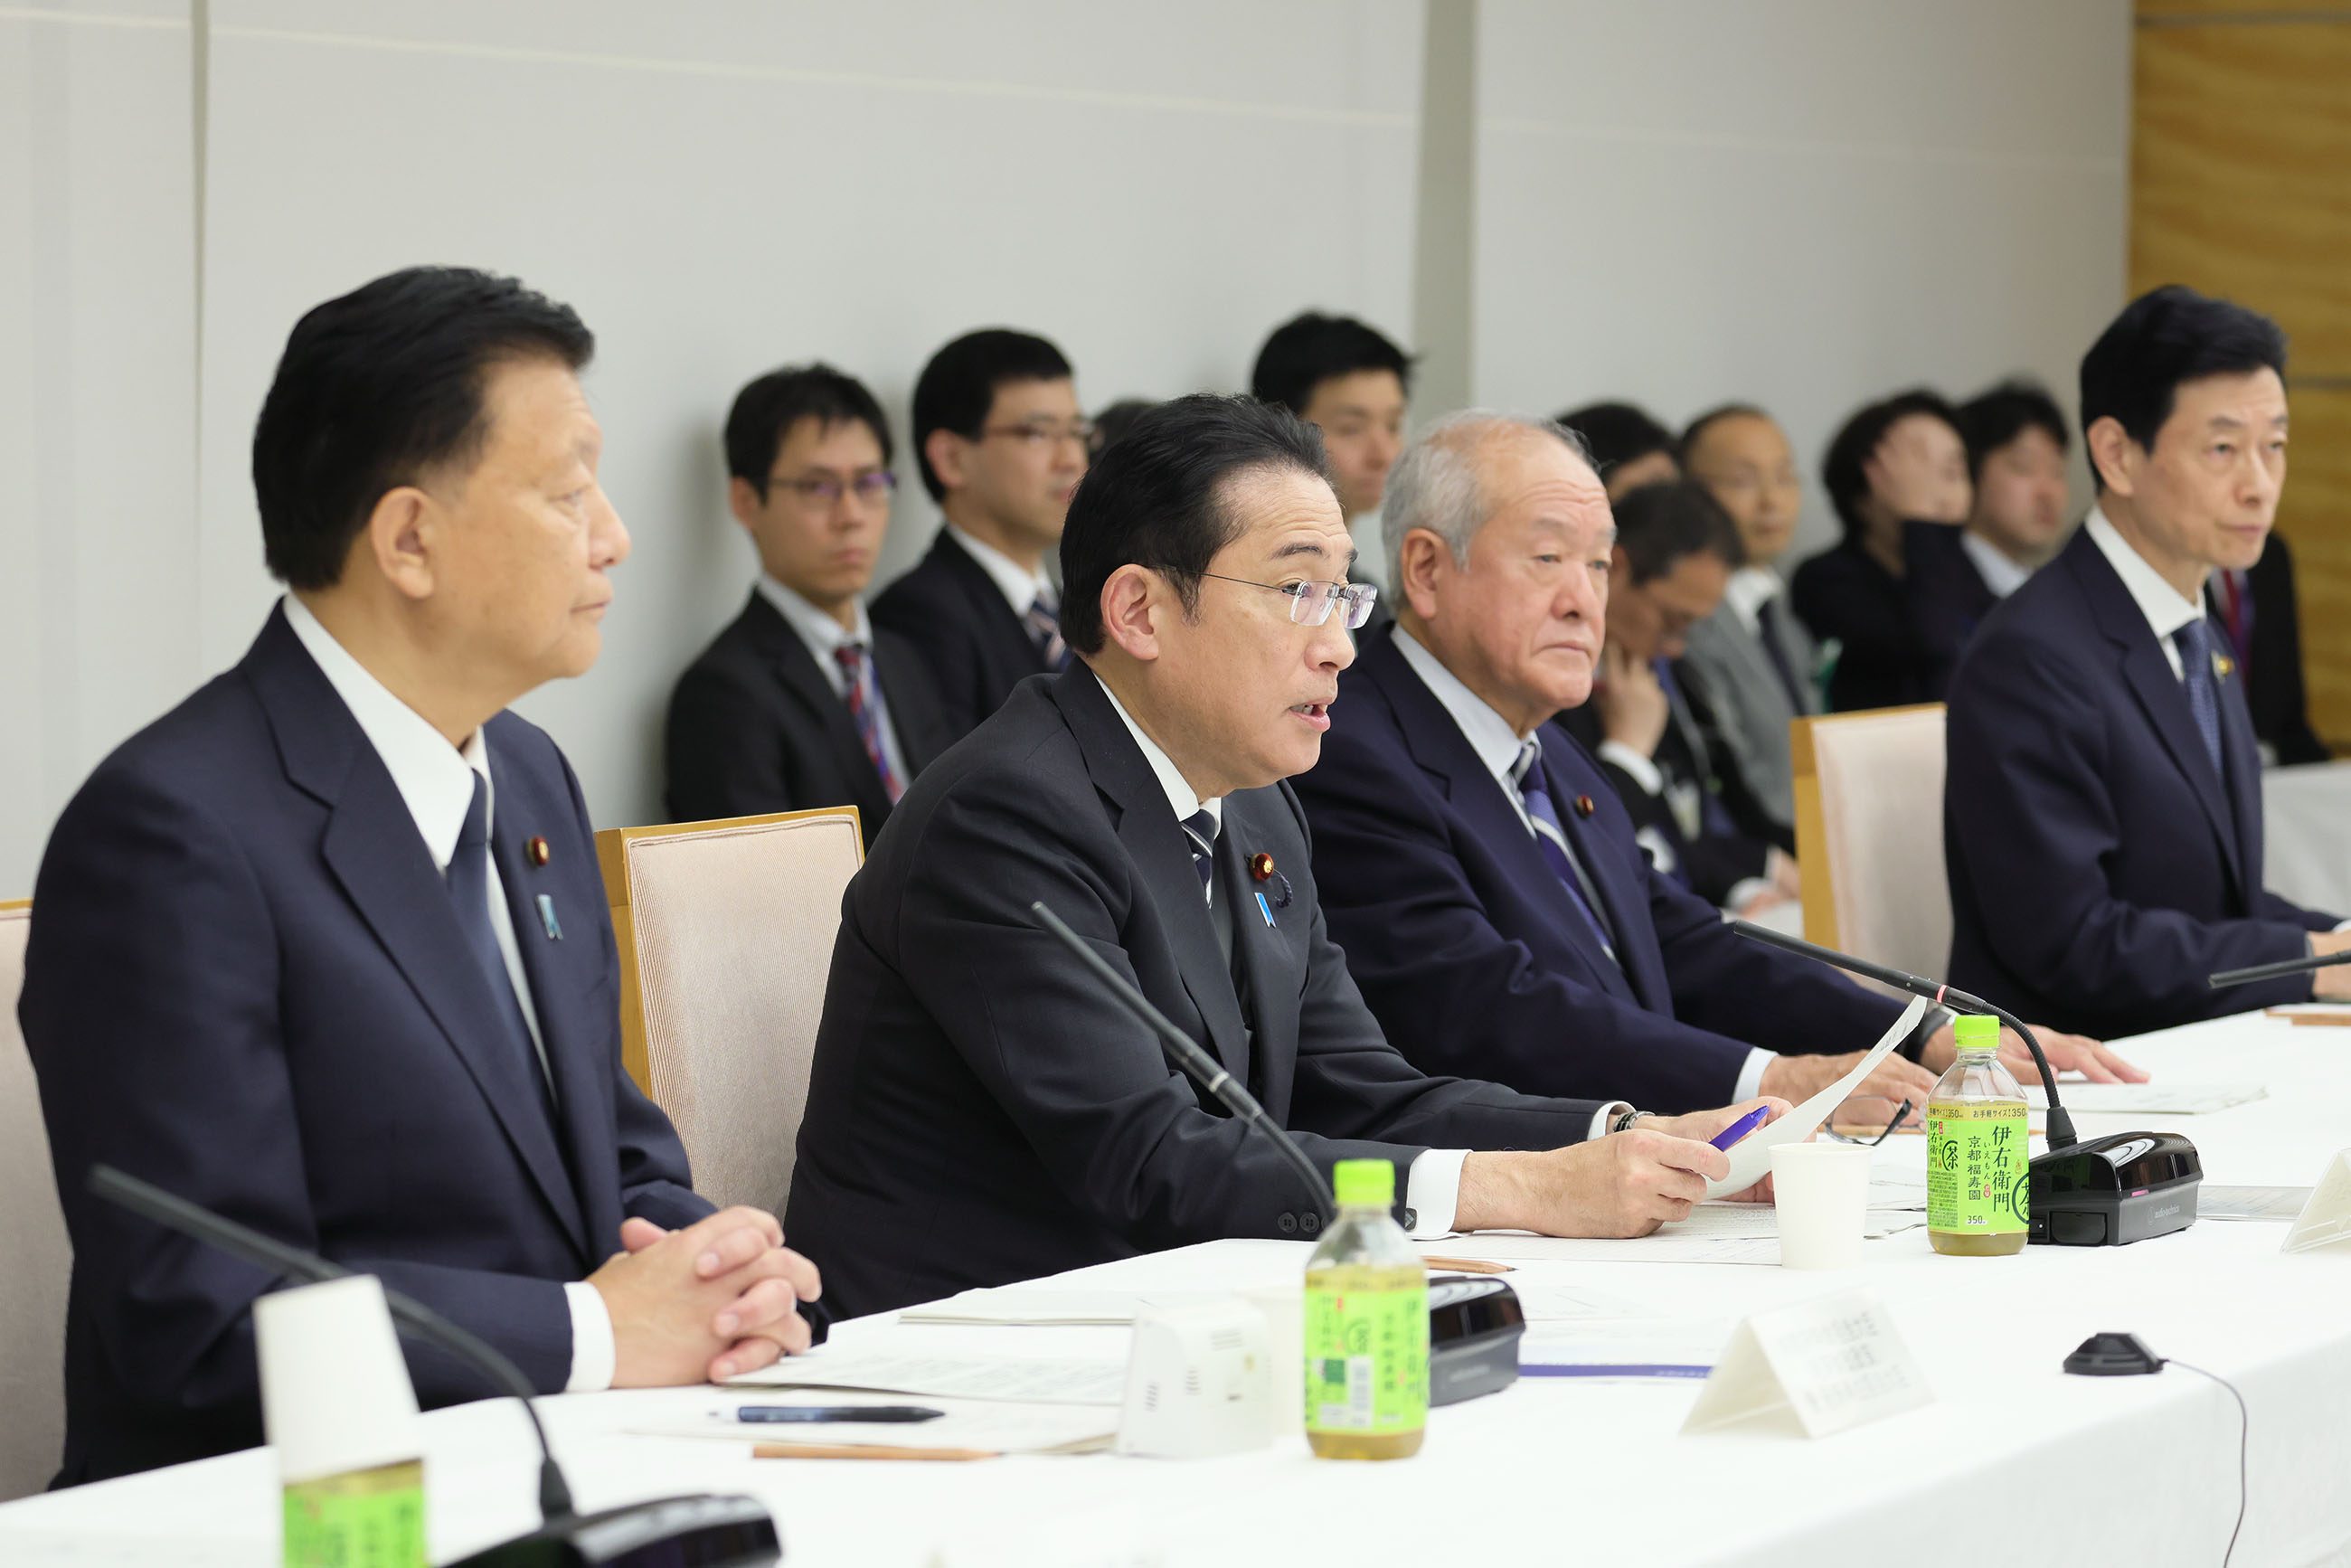 Meeting of the Council on Economic and Fiscal Policy